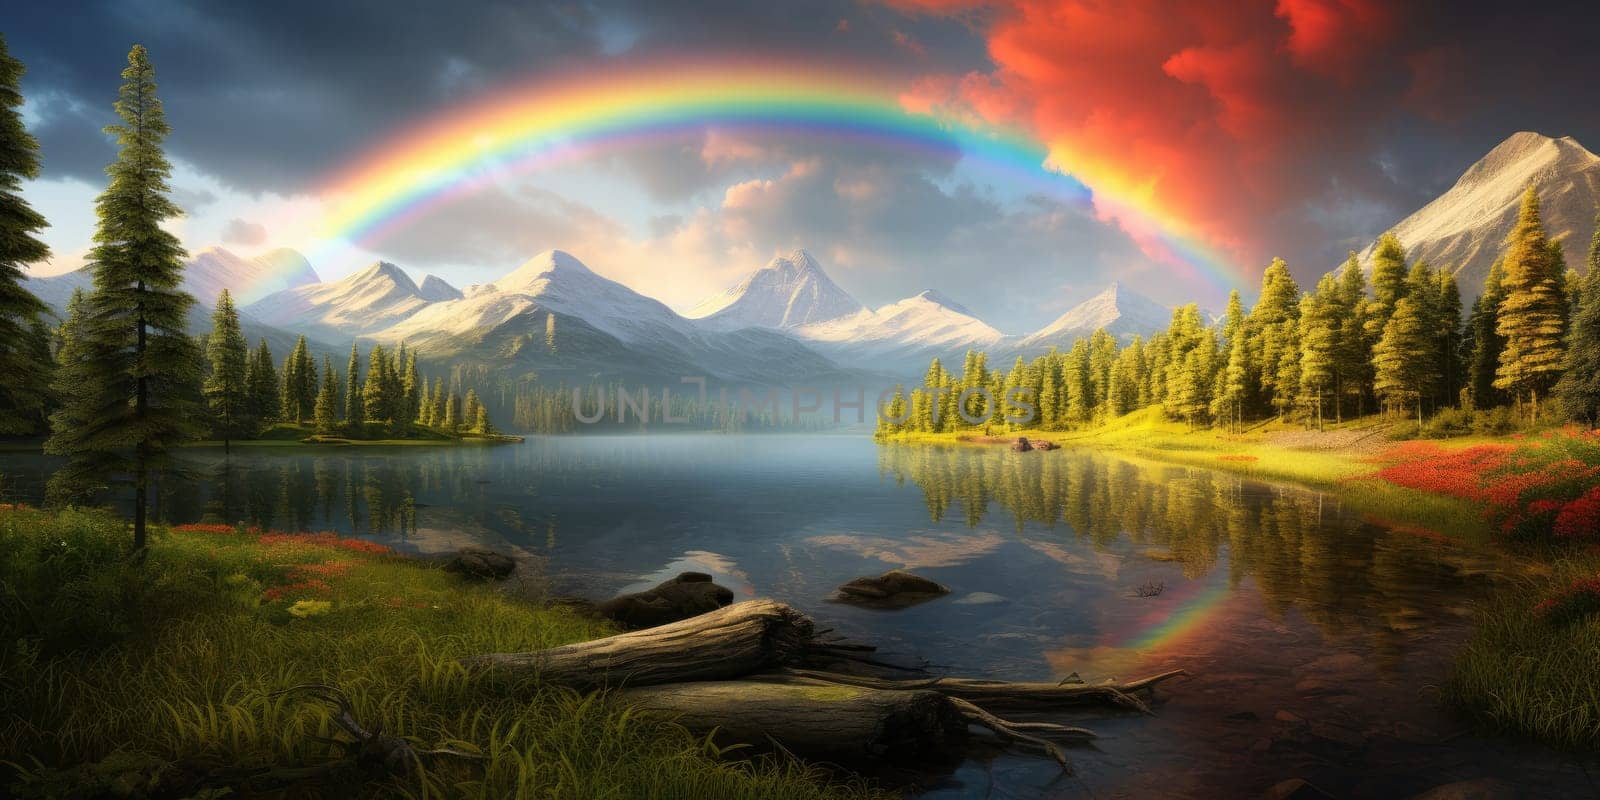 Colorful, huge rainbow over a beautiful scenery nature, landscape